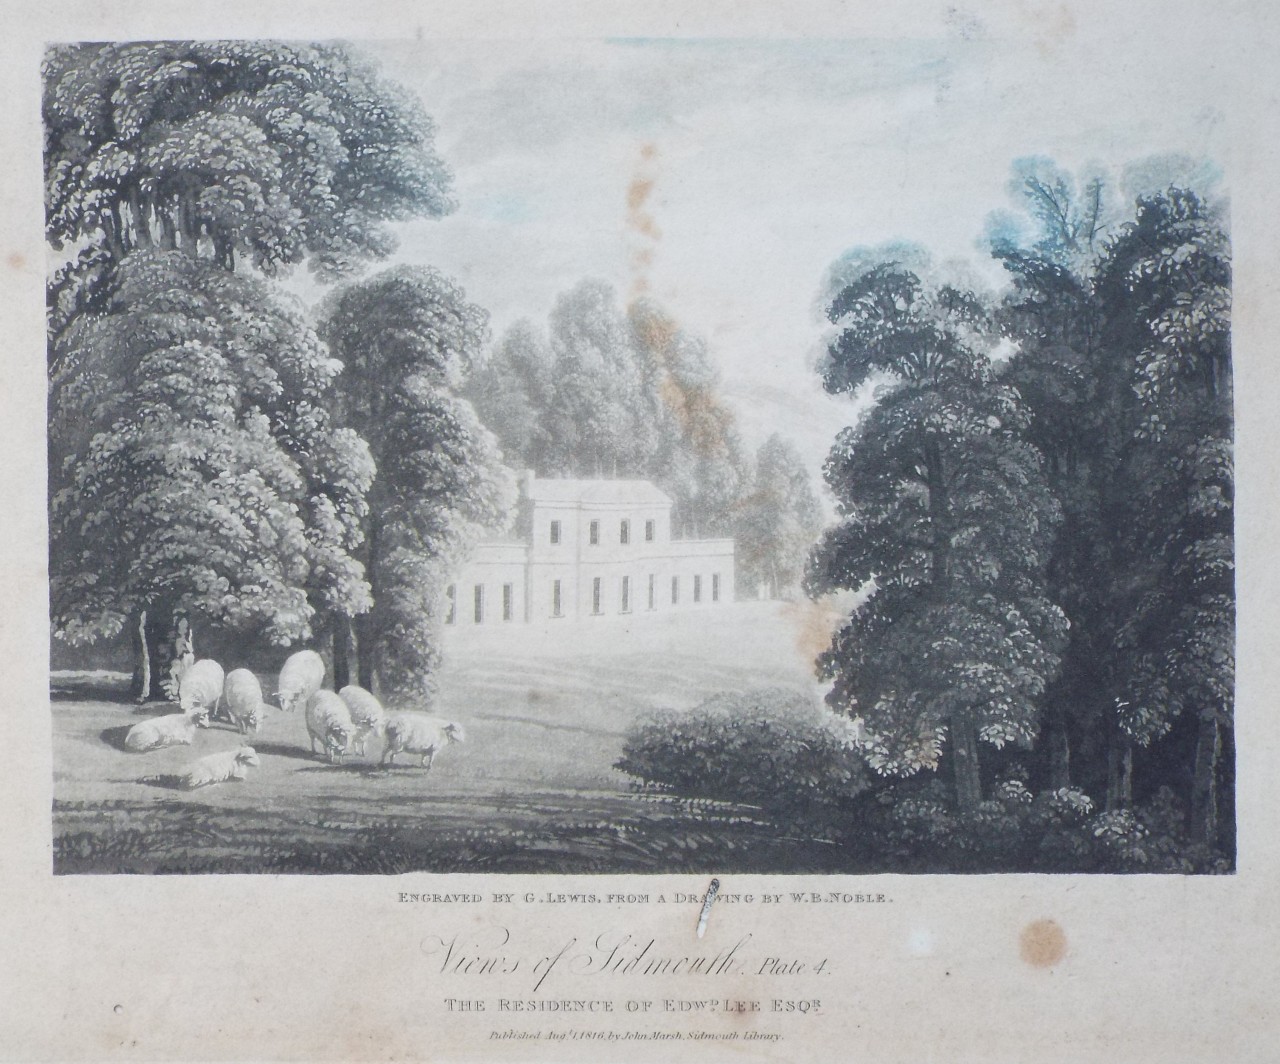 Aquatint - Views of Sidmouth. Plate 4. The Residence of Edwd. Lee Esqr. - Lewis